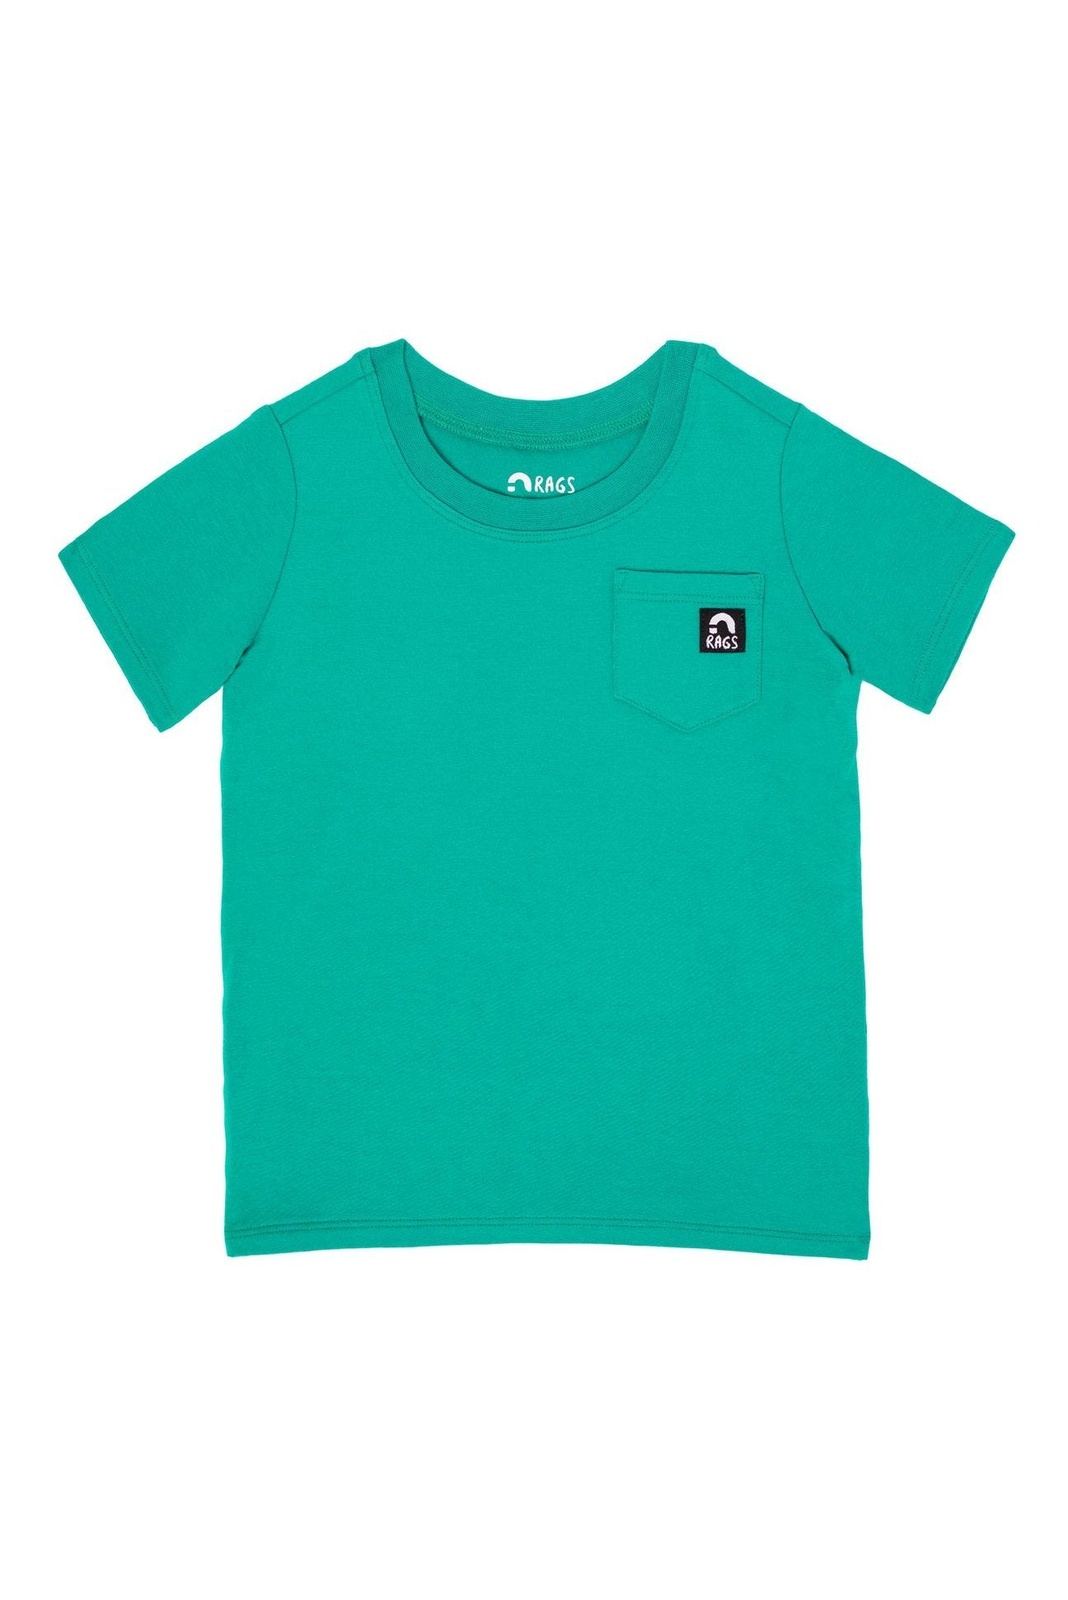 Essentials Short Sleeve Chest Pocket Rounded Tee - 'Teal' - Tea for Three: A Children's Boutique-New Arrivals-TheT43Shop